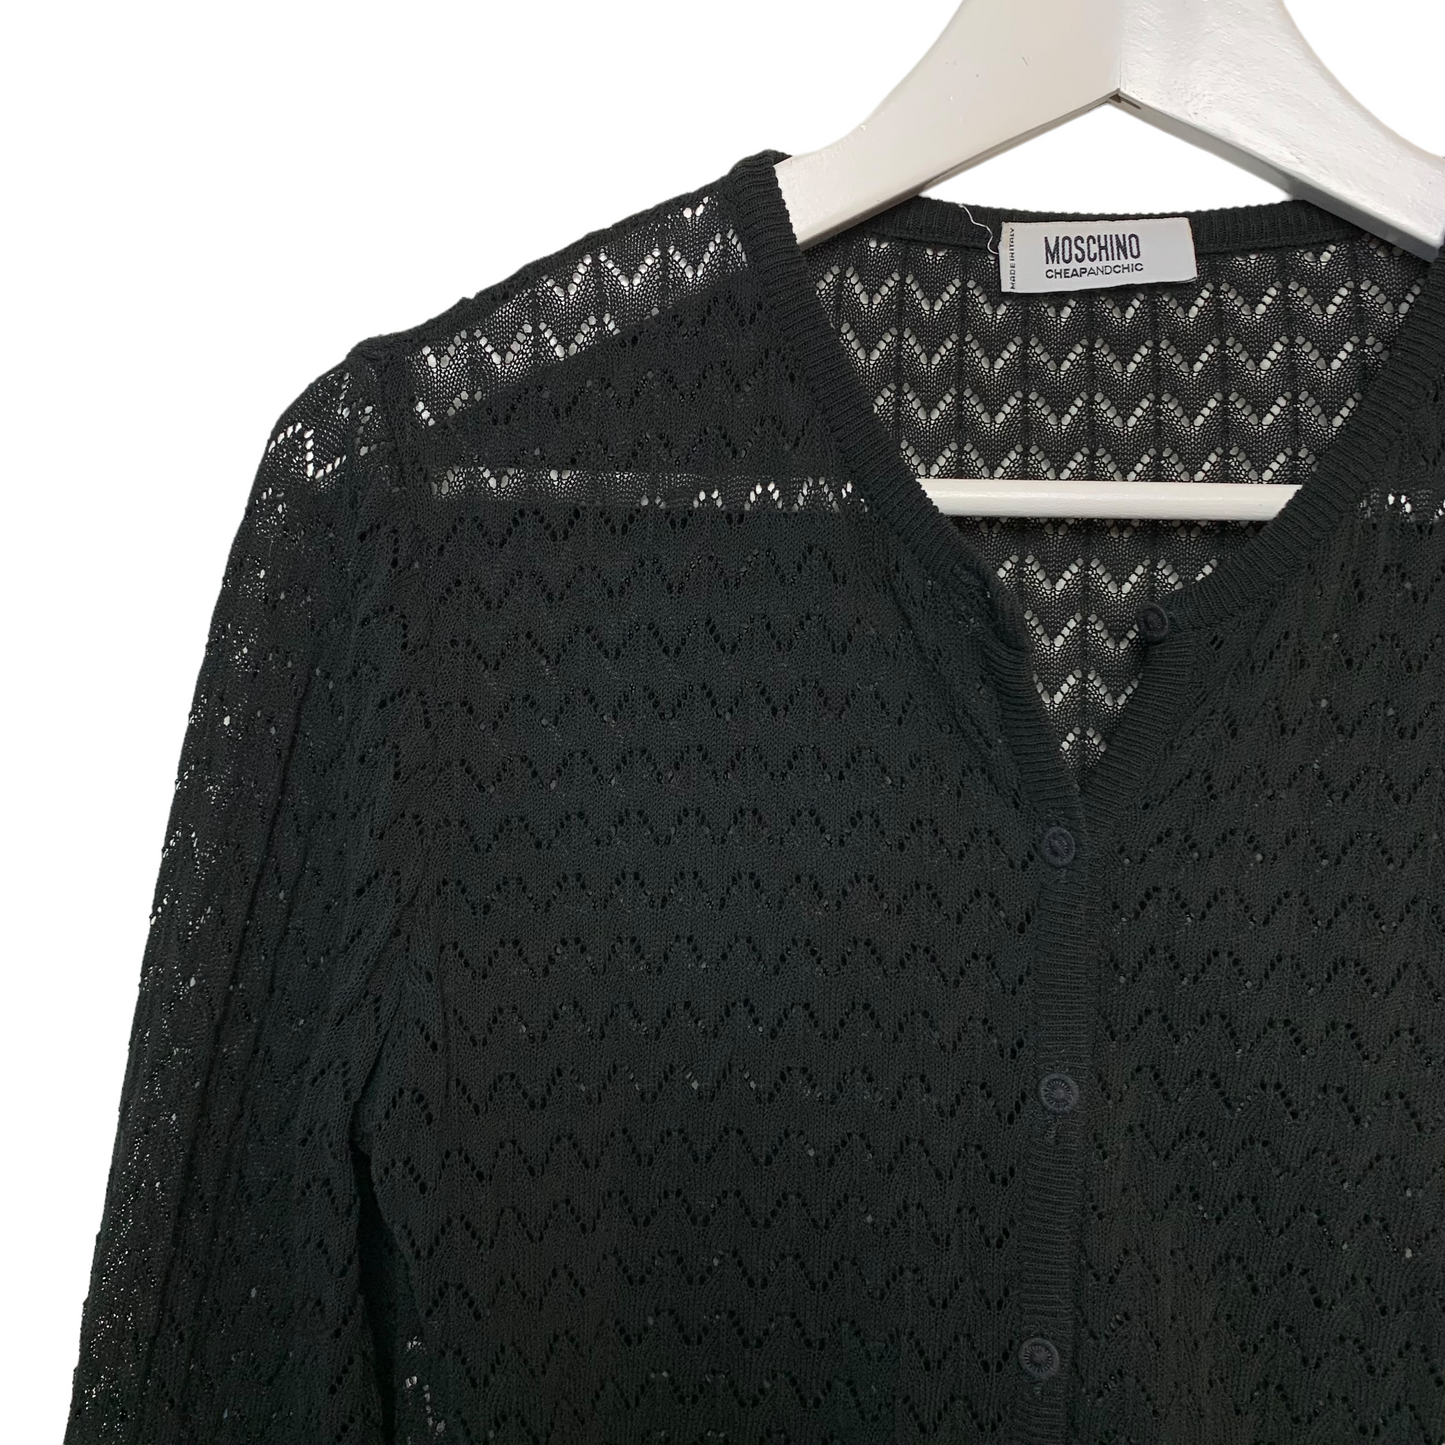 Vintage 90s Moschino Cheap and Chic Black Cardigan Sweater